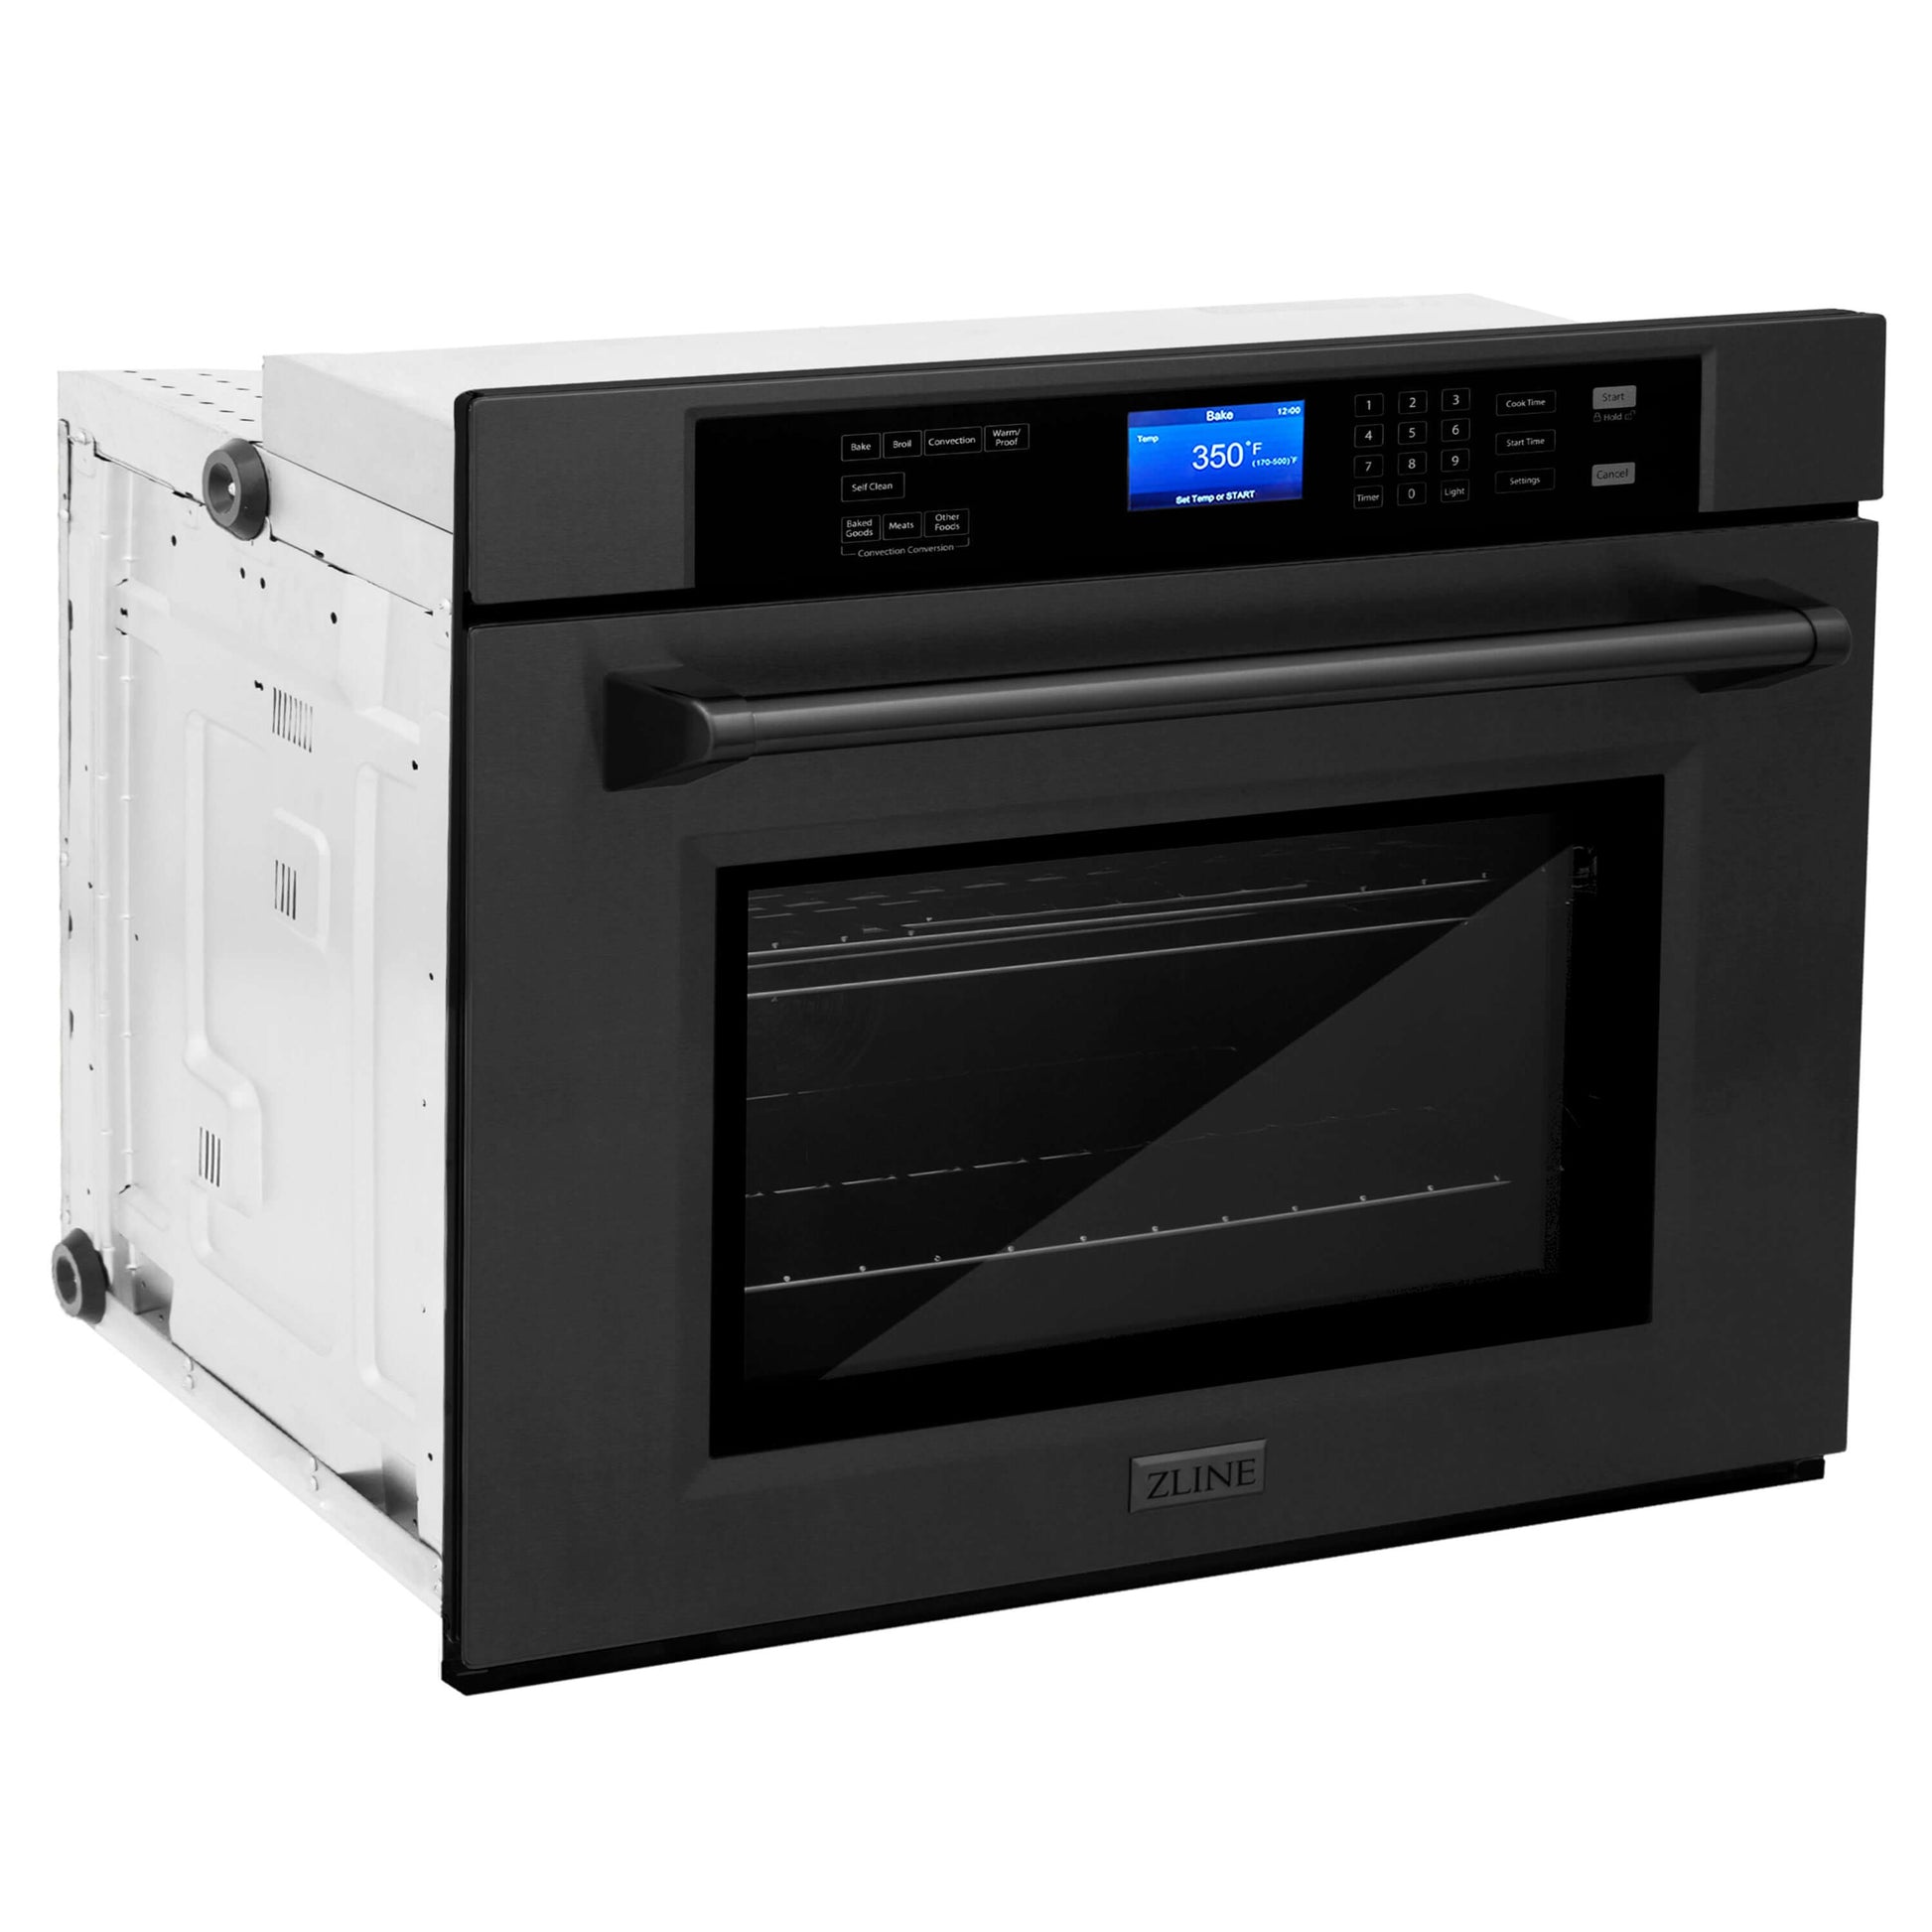 ZLINE 30 in. Professional Electric Single Wall Oven with Self Clean and True Convection in Black Stainless Steel (AWS-30-BS) side, closed.